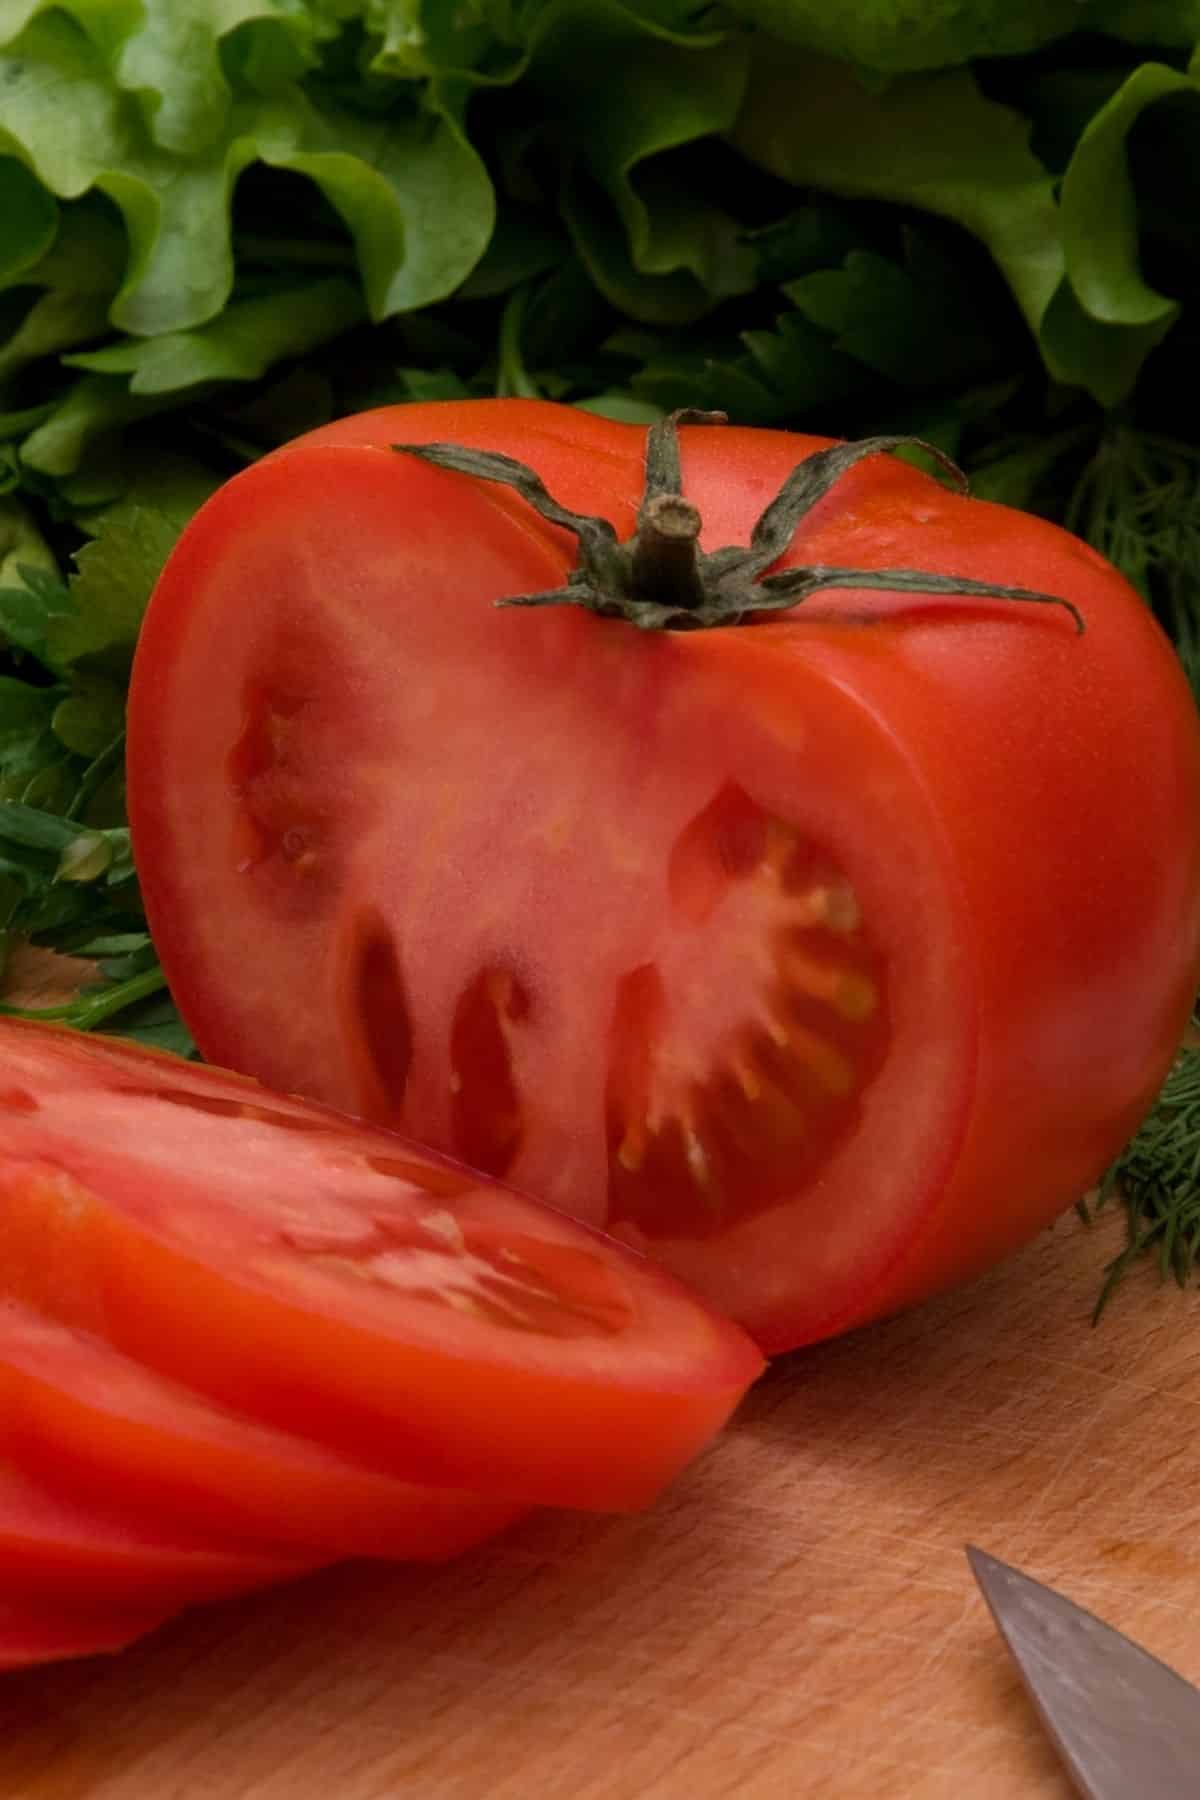 A large tomato cut into slices.